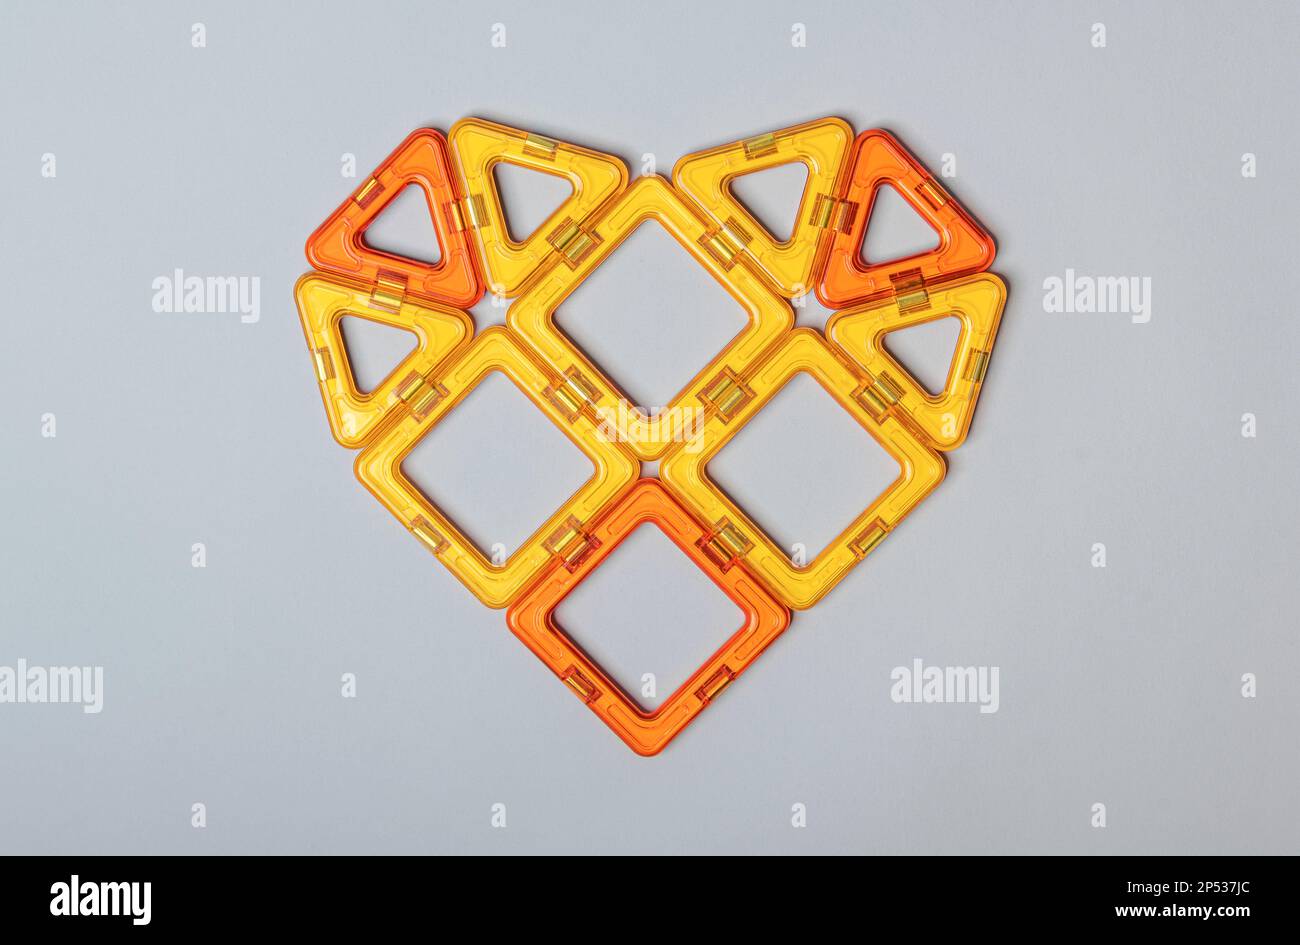 The figure of the heart from the details of the magnetic designer. Stock Photo